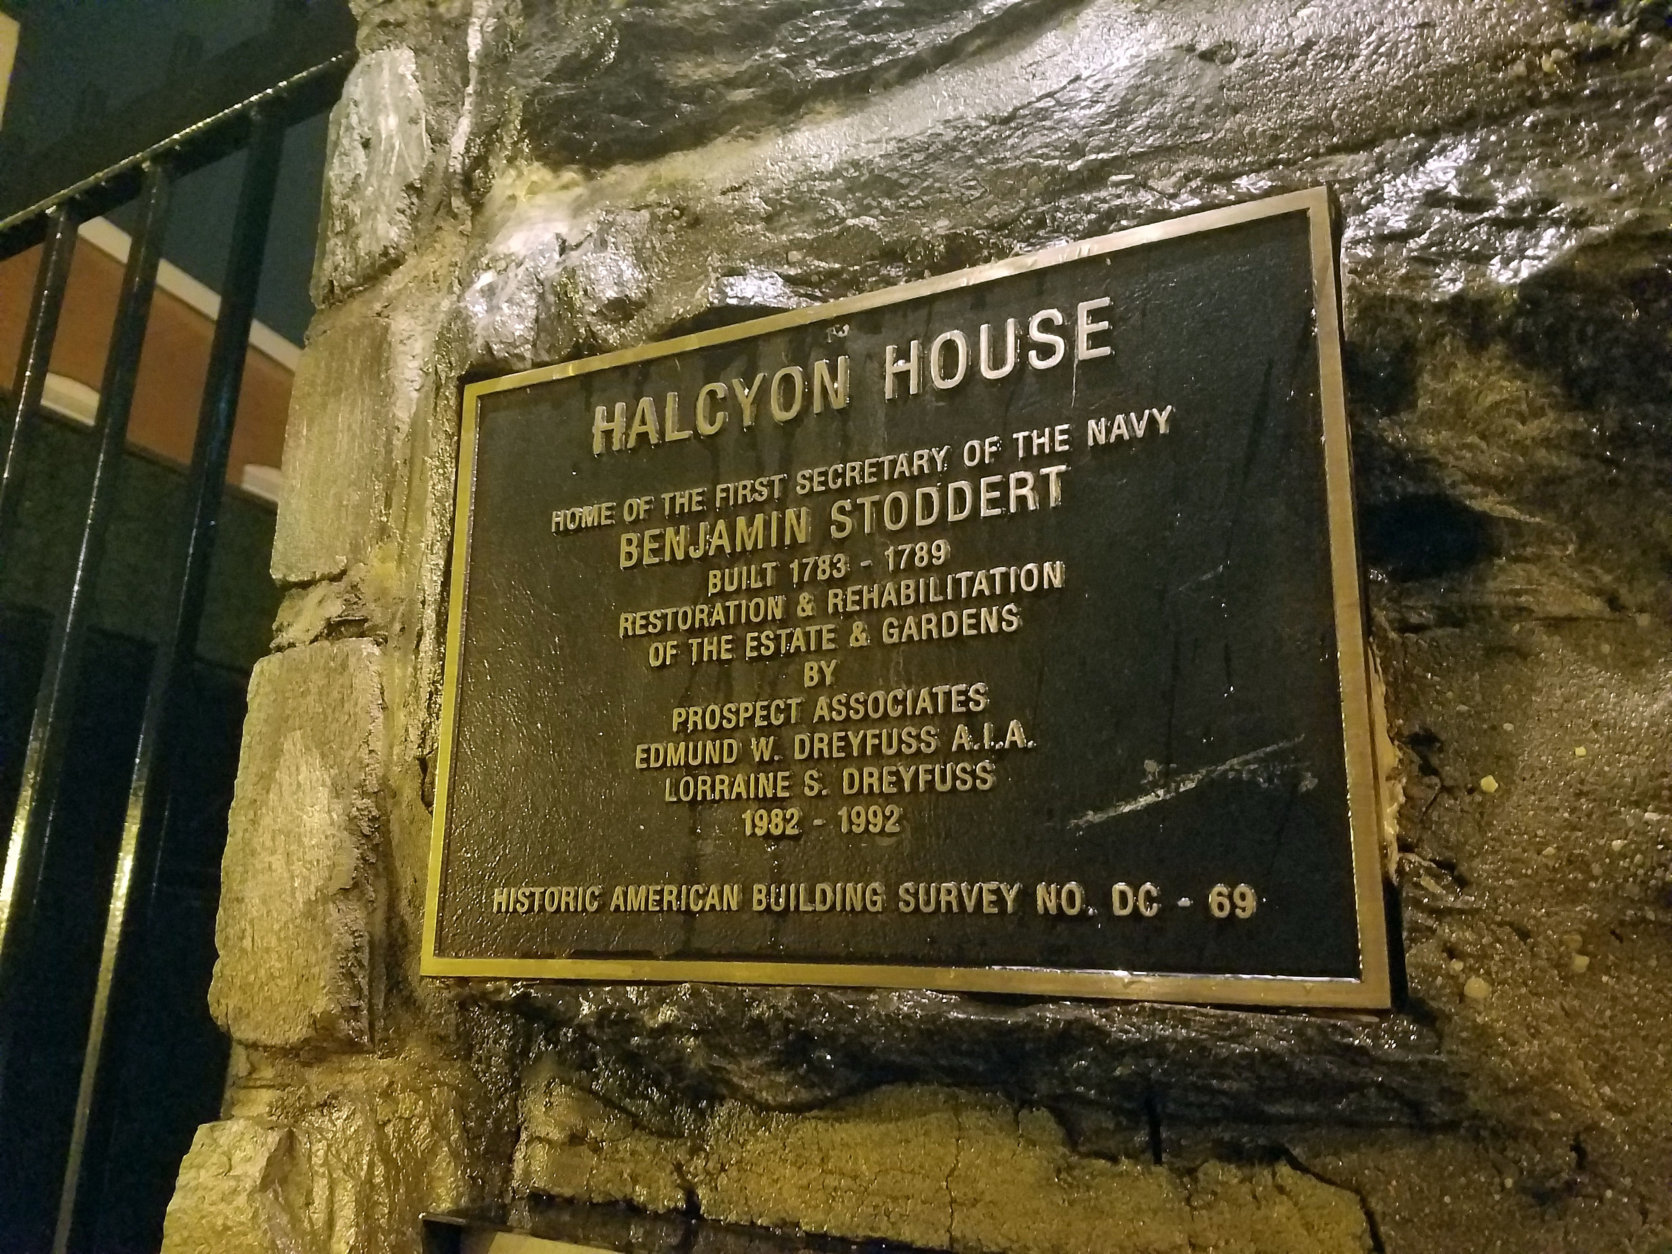 The plaque for Halcyon House. (WTOP/Will Vitka)